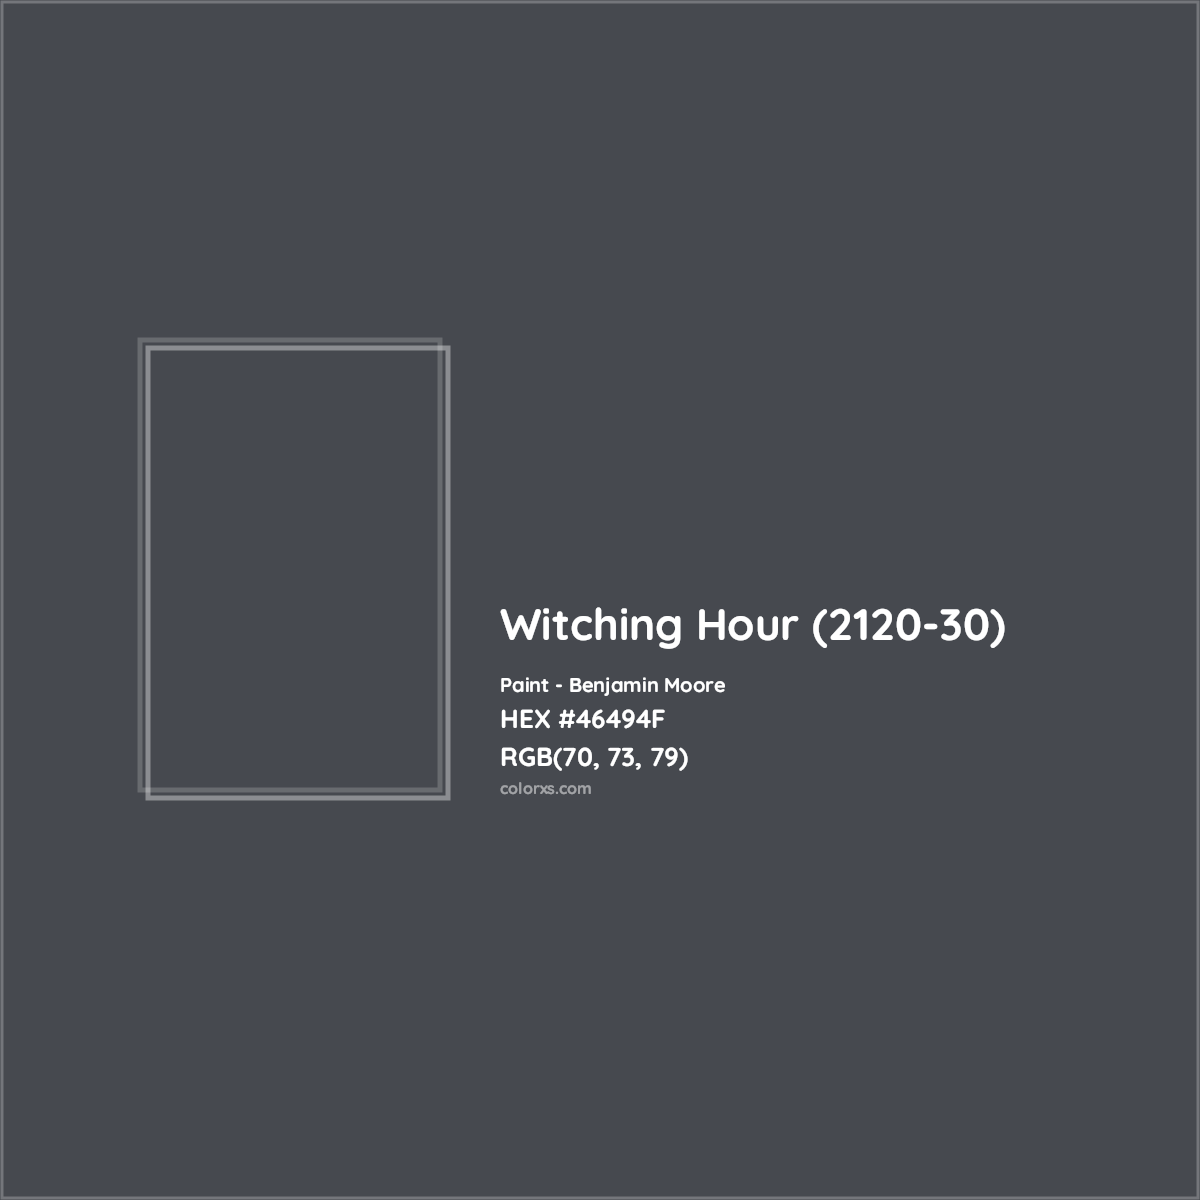 HEX #46494F Witching Hour (2120-30) Paint Benjamin Moore - Color Code